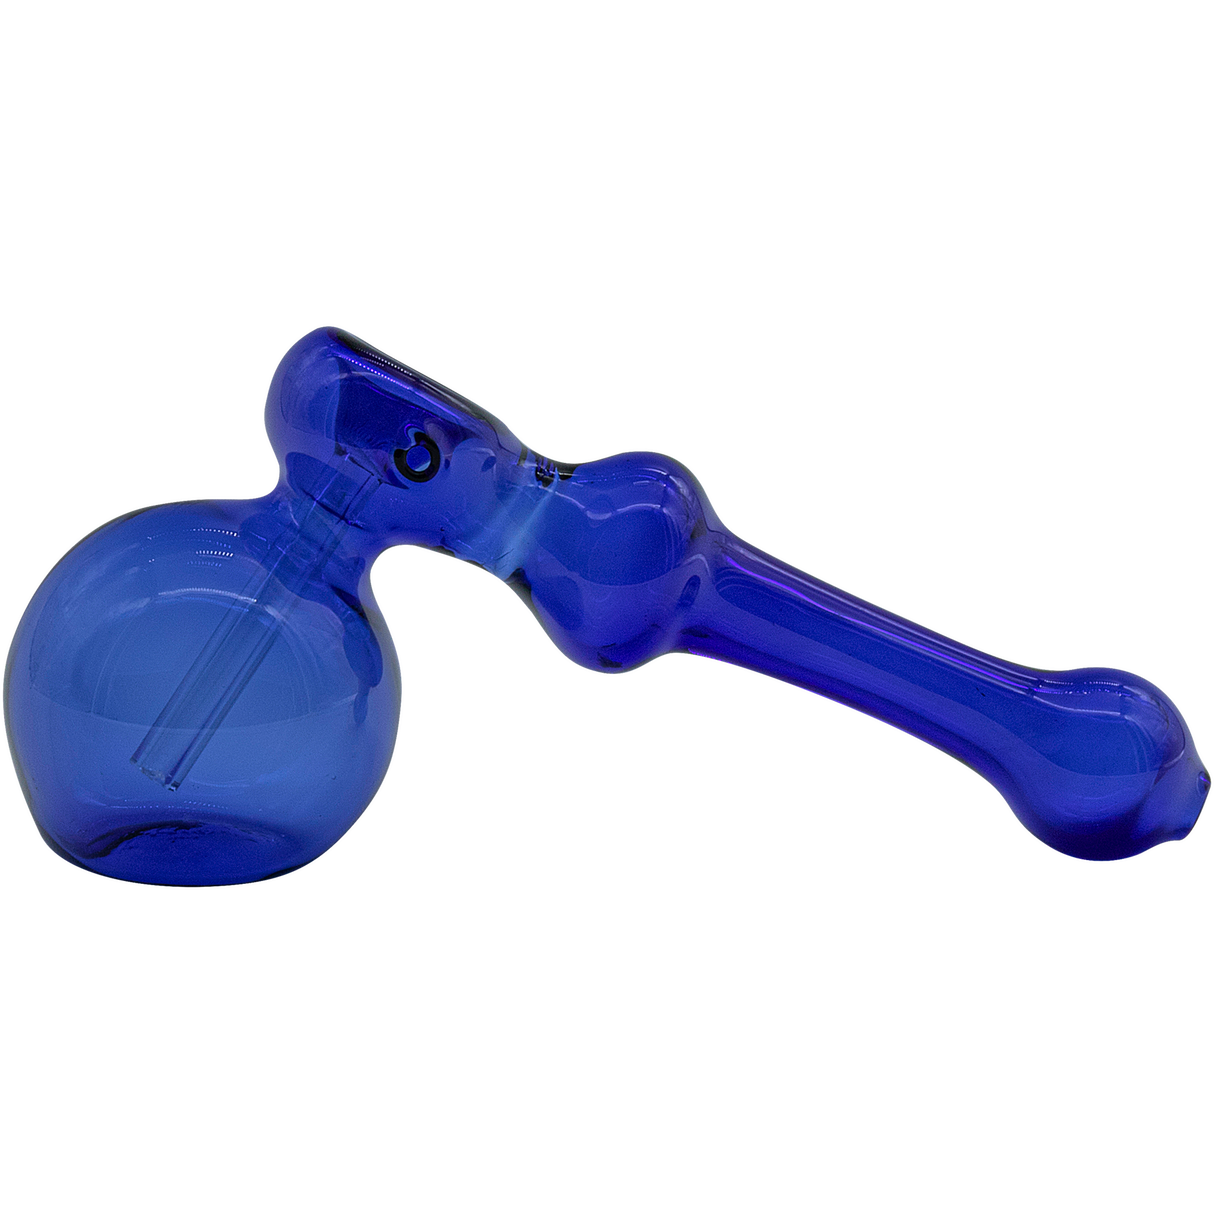 LA Pipes Glass Hammer Bubbler Pipe in blue, 6" borosilicate glass, ideal for dry herbs - side view